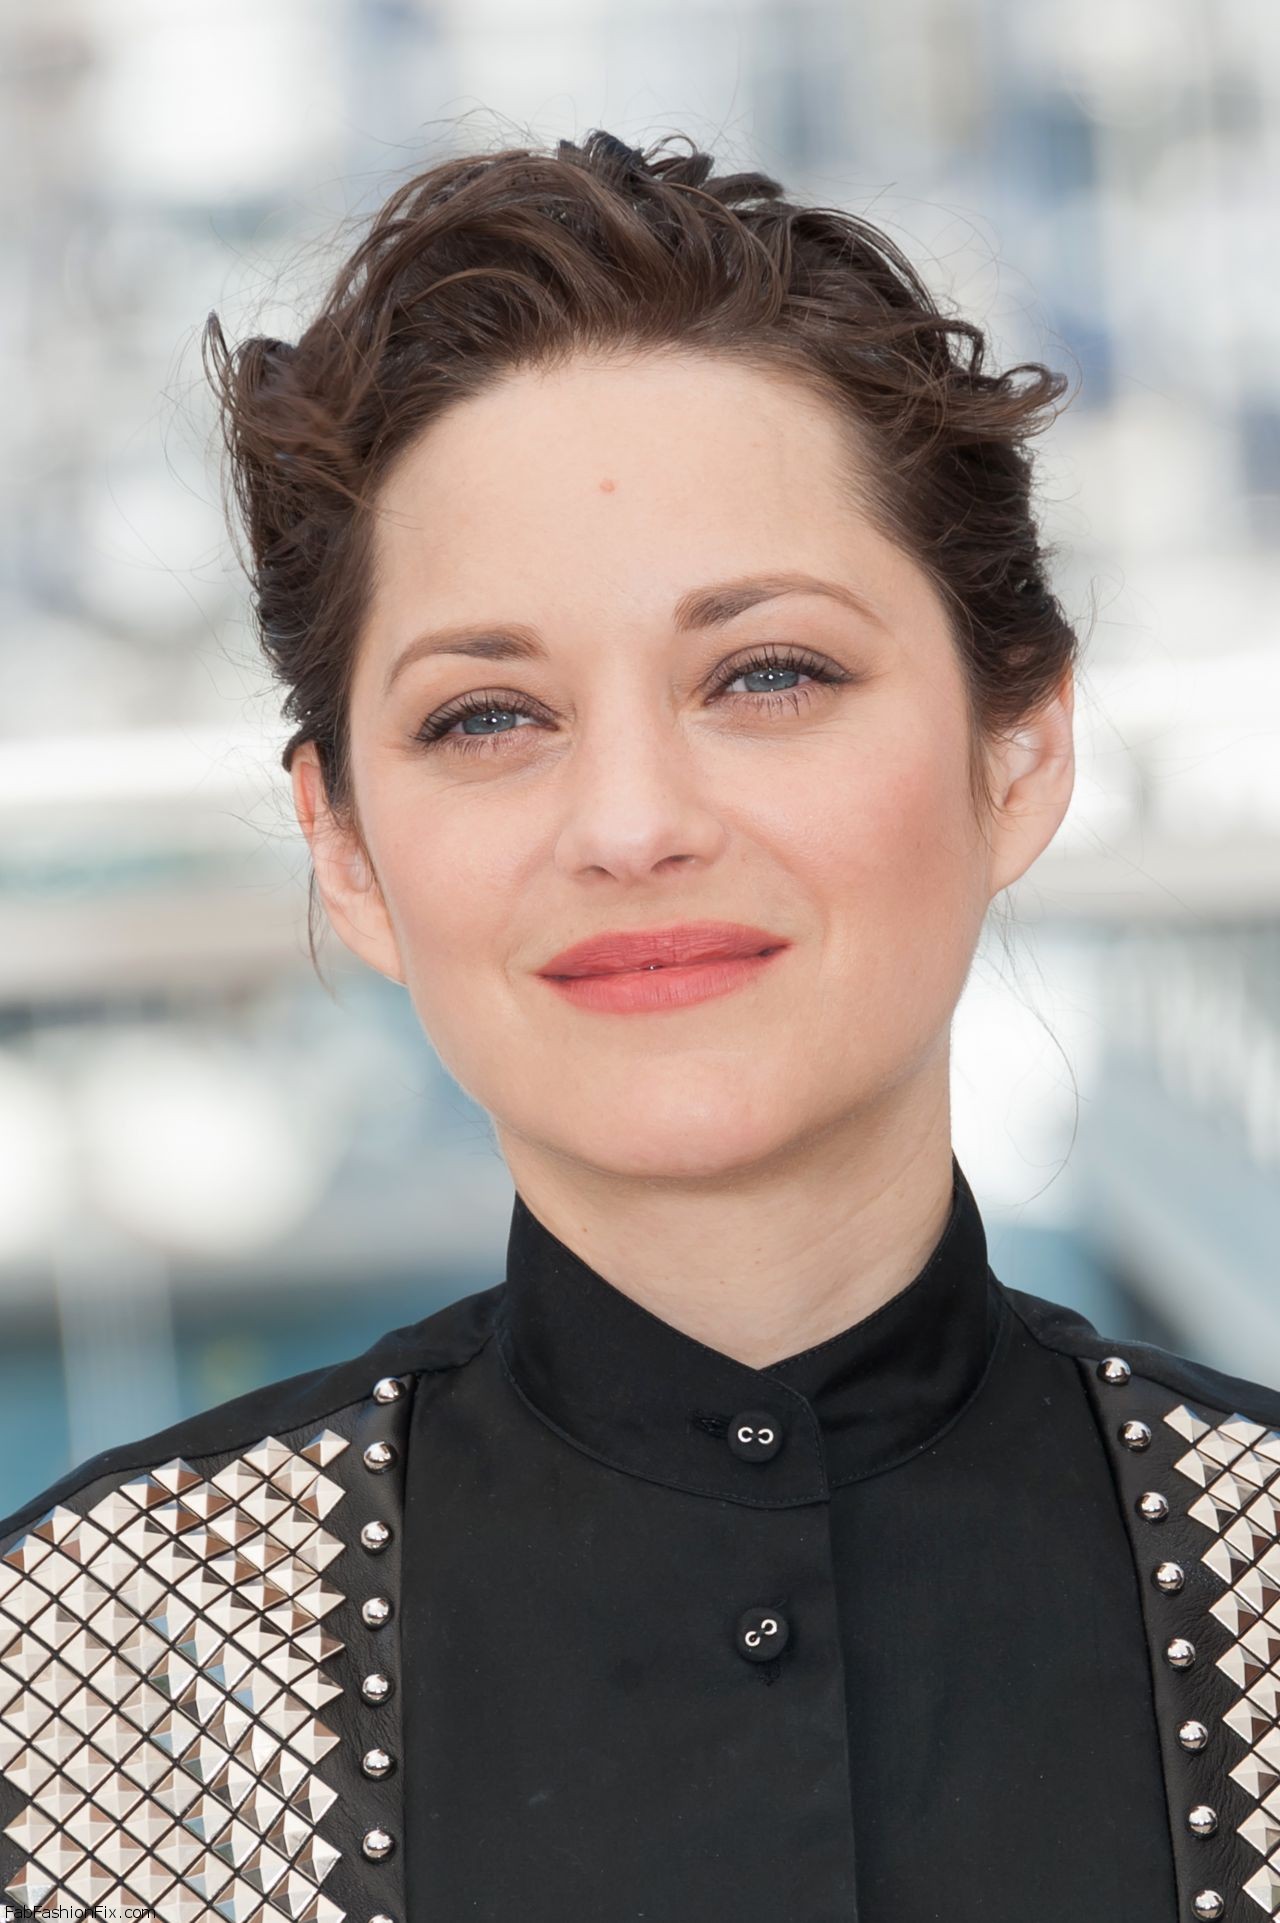 marion-cotillard-it-s-only-the-end-of-the-world-photocall-69th-cannes-film-festival-5-19-2016-1